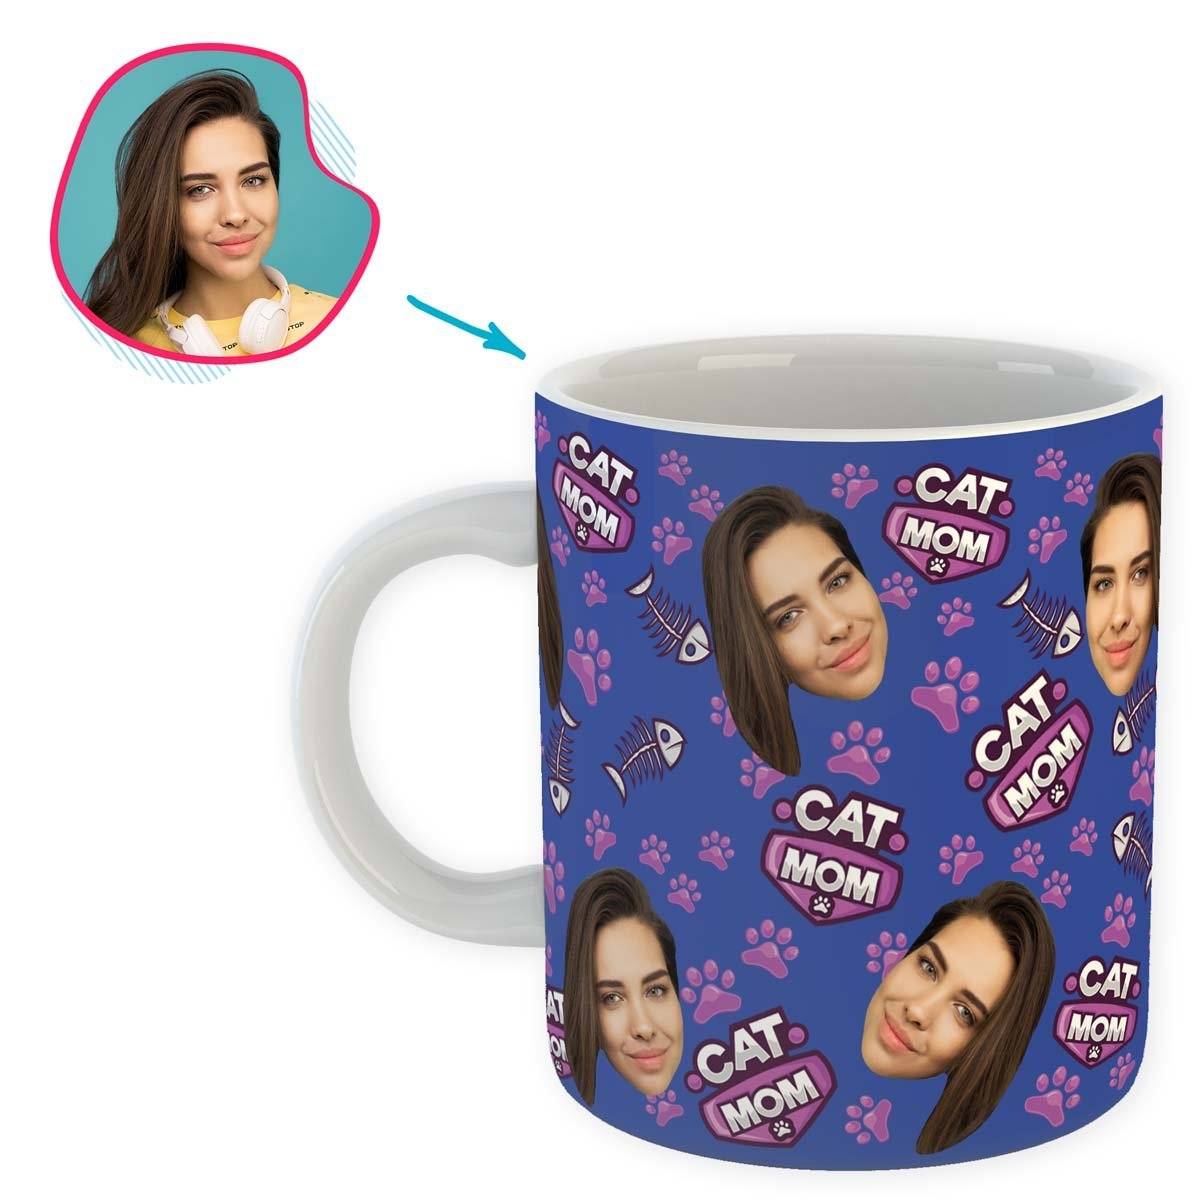 darkblue Cat Mom mug personalized with photo of face printed on it